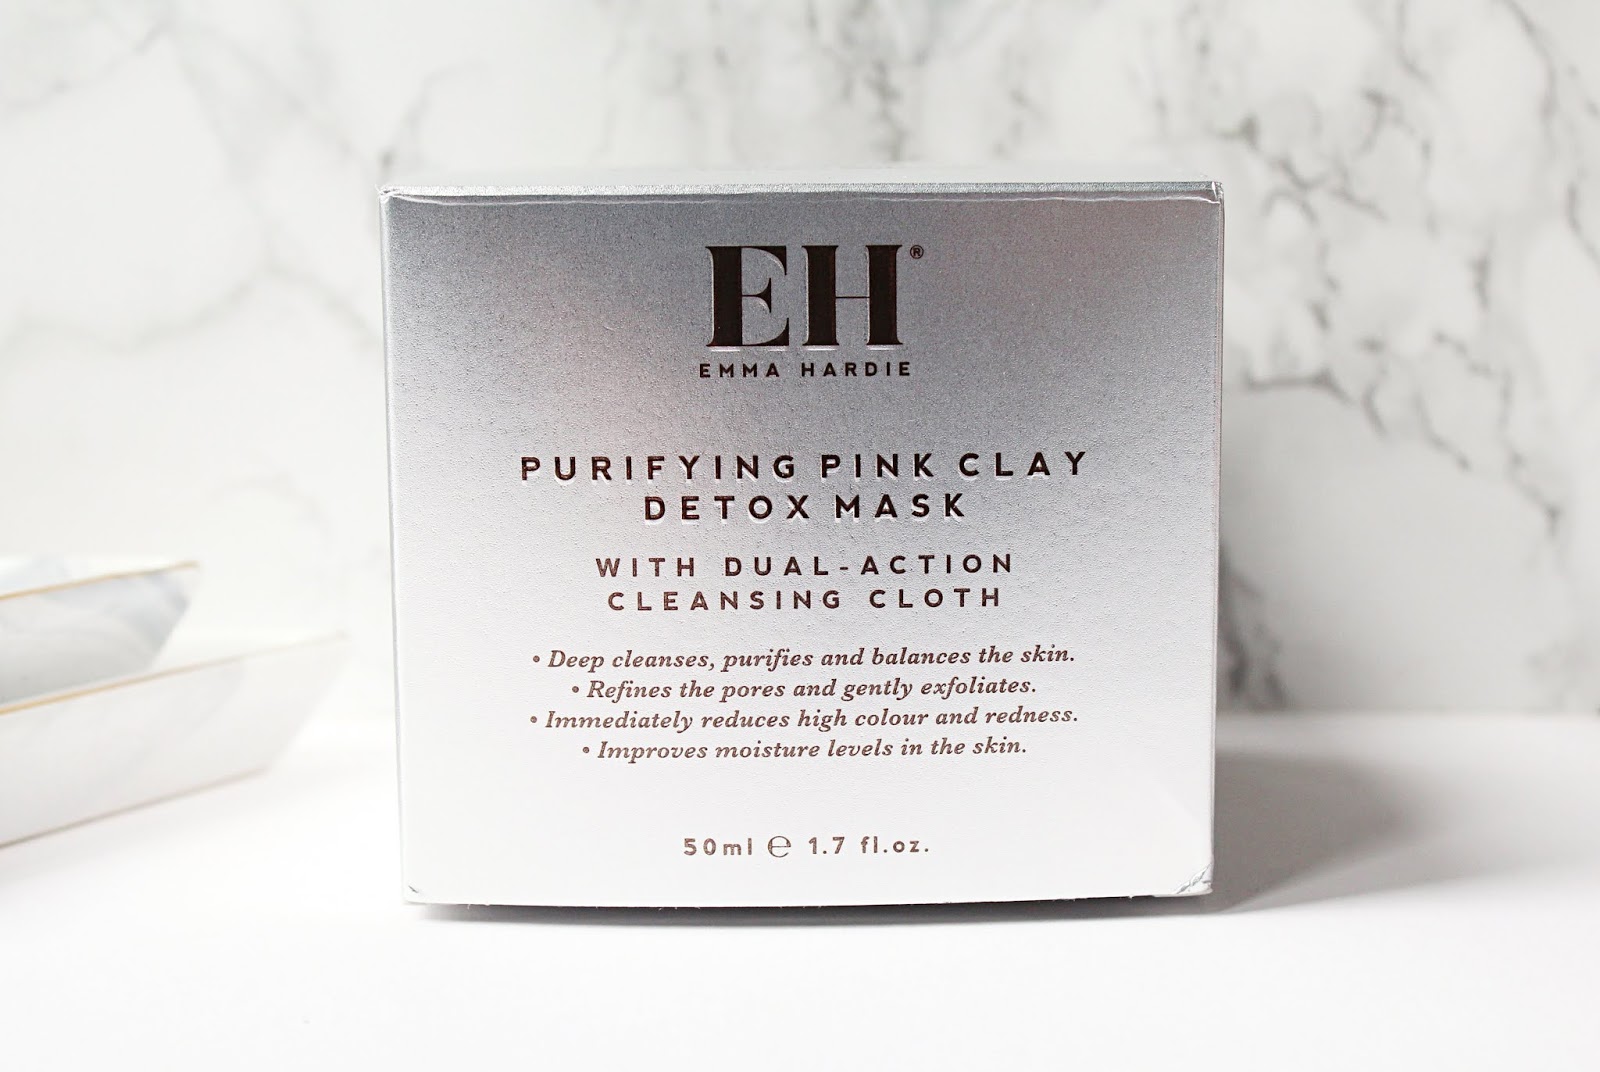 Emma Hardie Purifying Pink Clay Detox Mask Review 